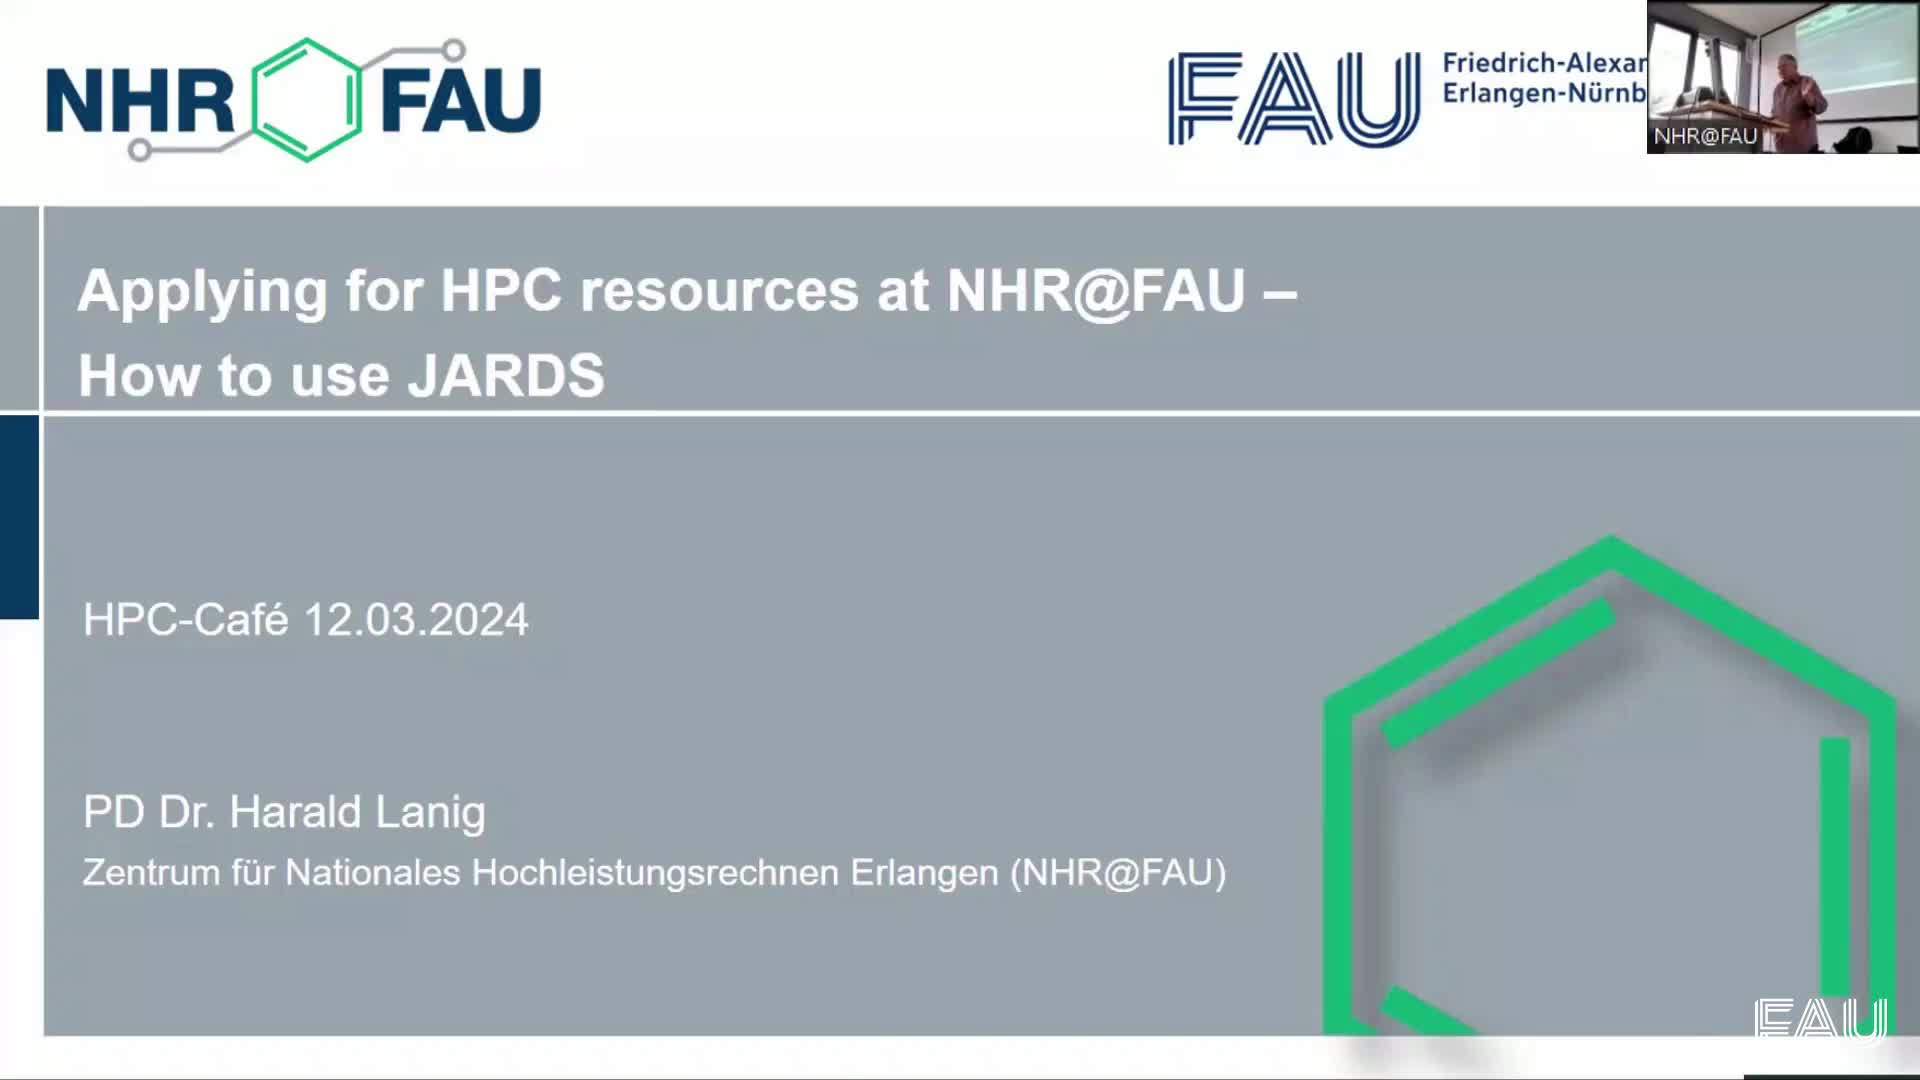 HPC Cafe on March 12, 2024: NHR Project Applications and the JARDS system preview image